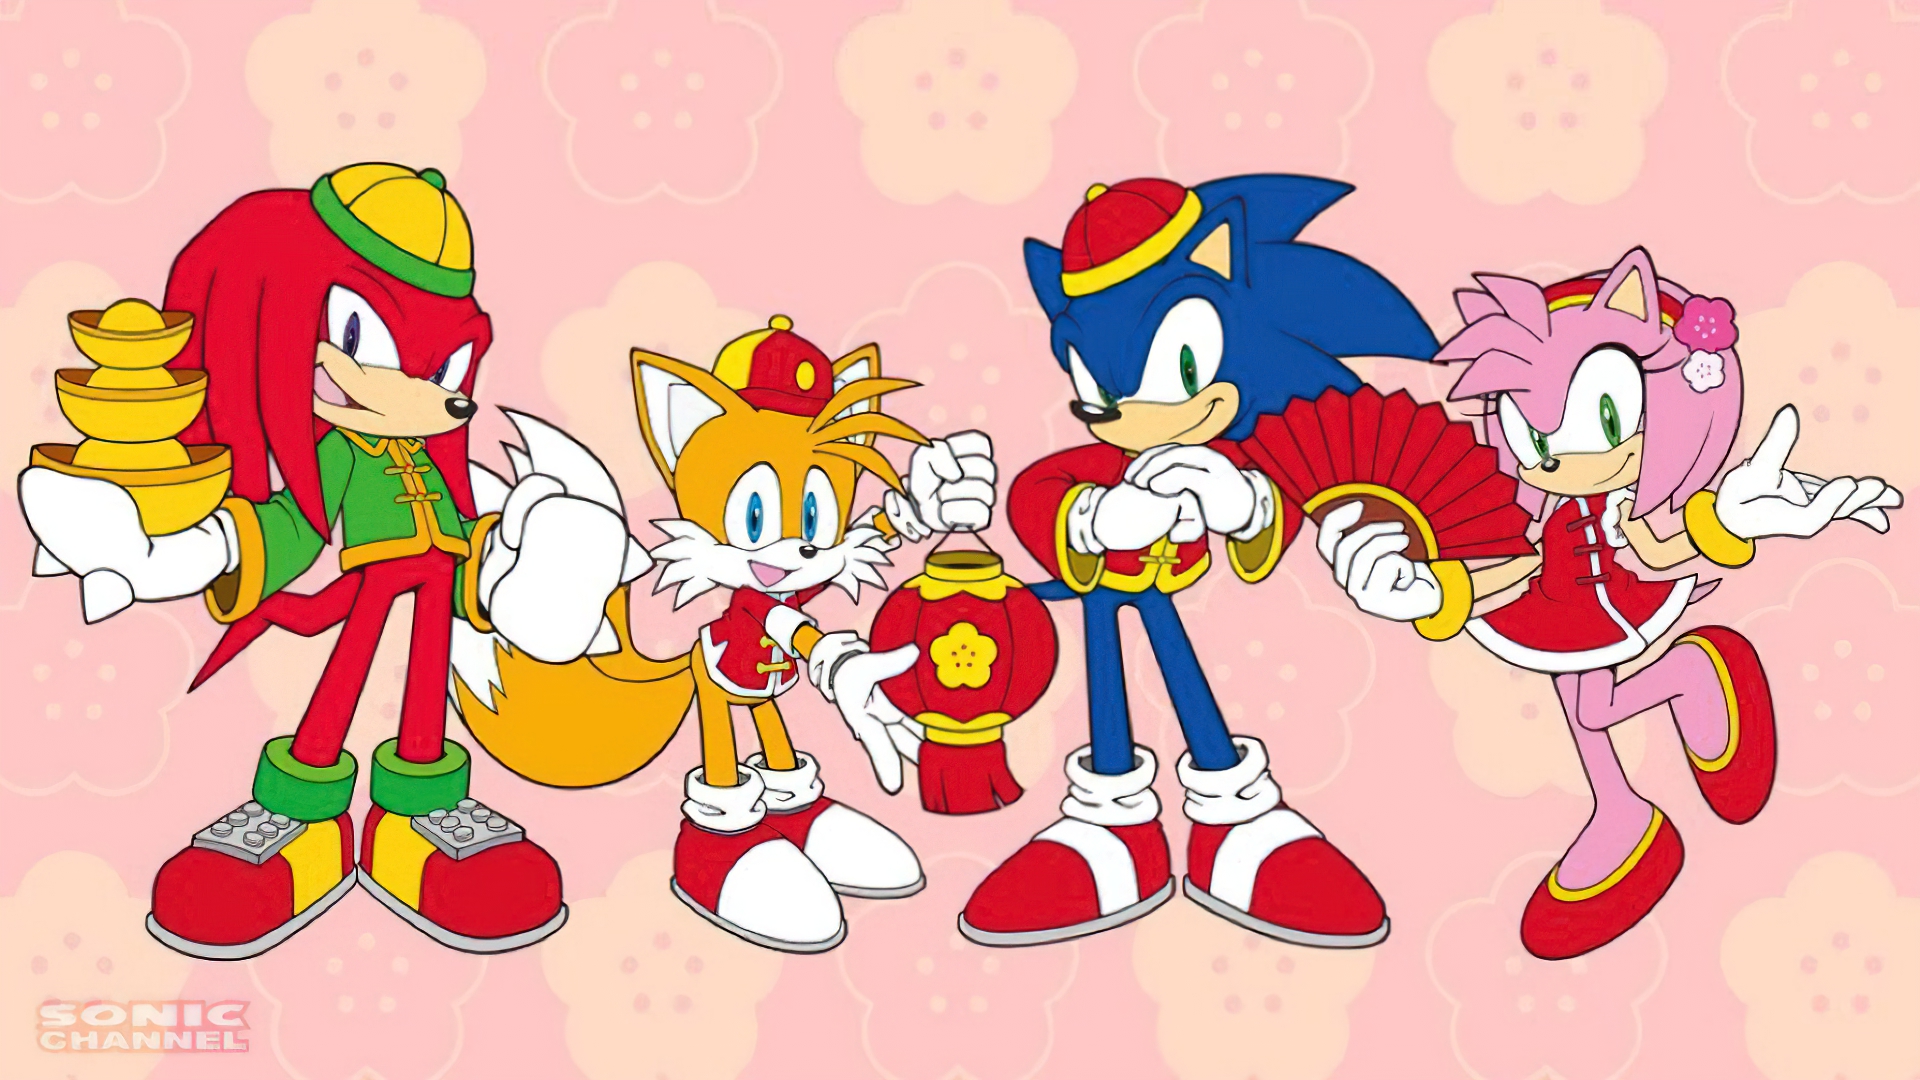 Sonic Tails Character Knuckles Sonic The Hedgehog Spring Festival Video Game Art Sega New Year 1920x1080